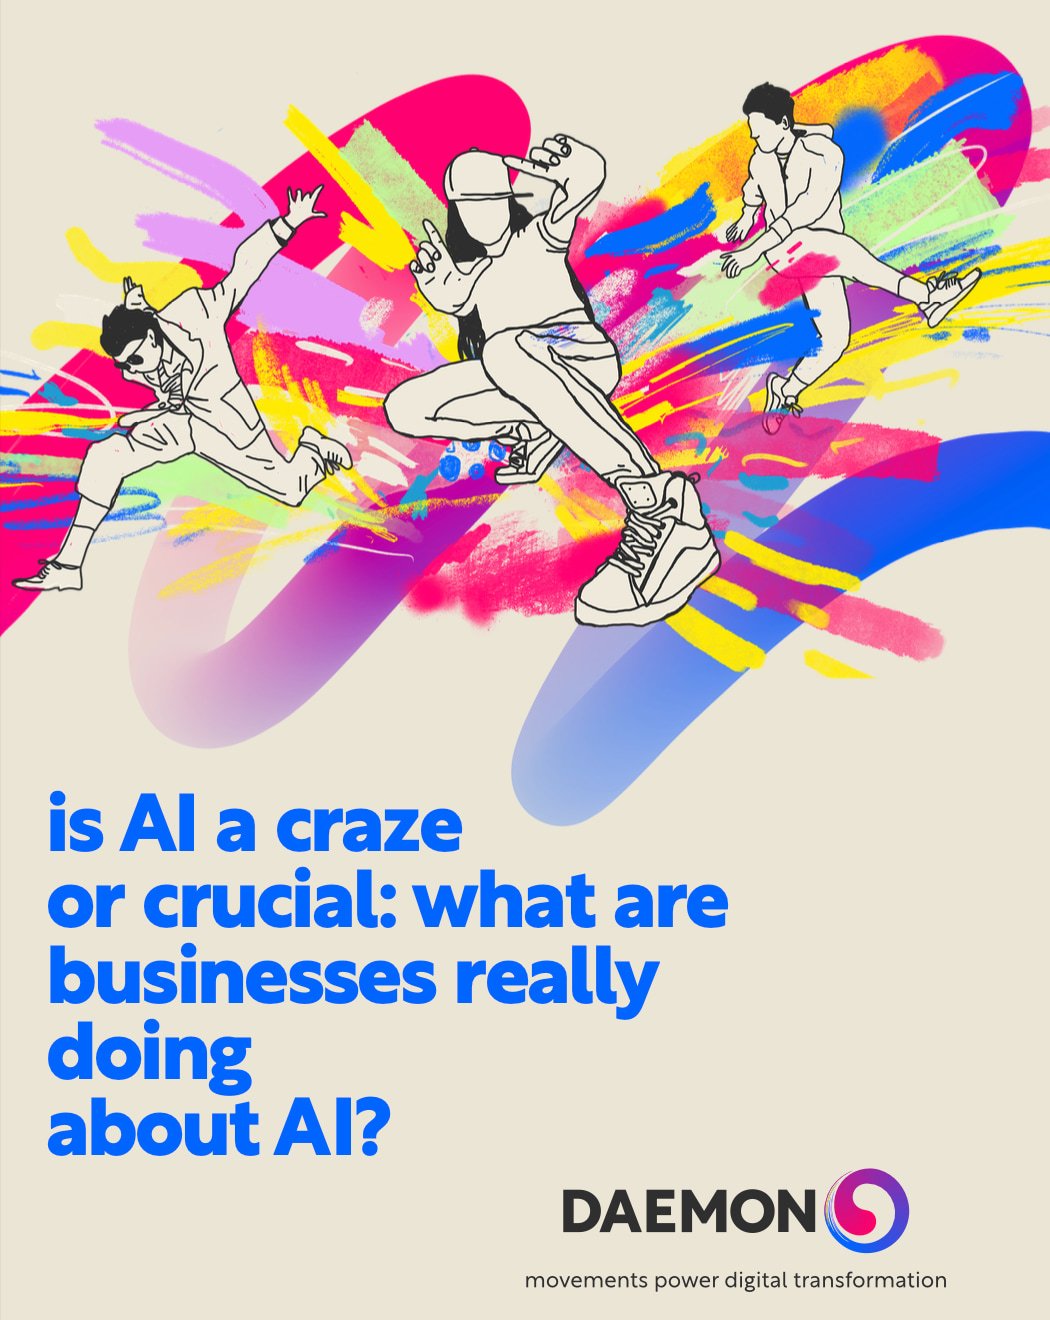 Is AI a crazy or crucial: what are businesses really doing about AI?